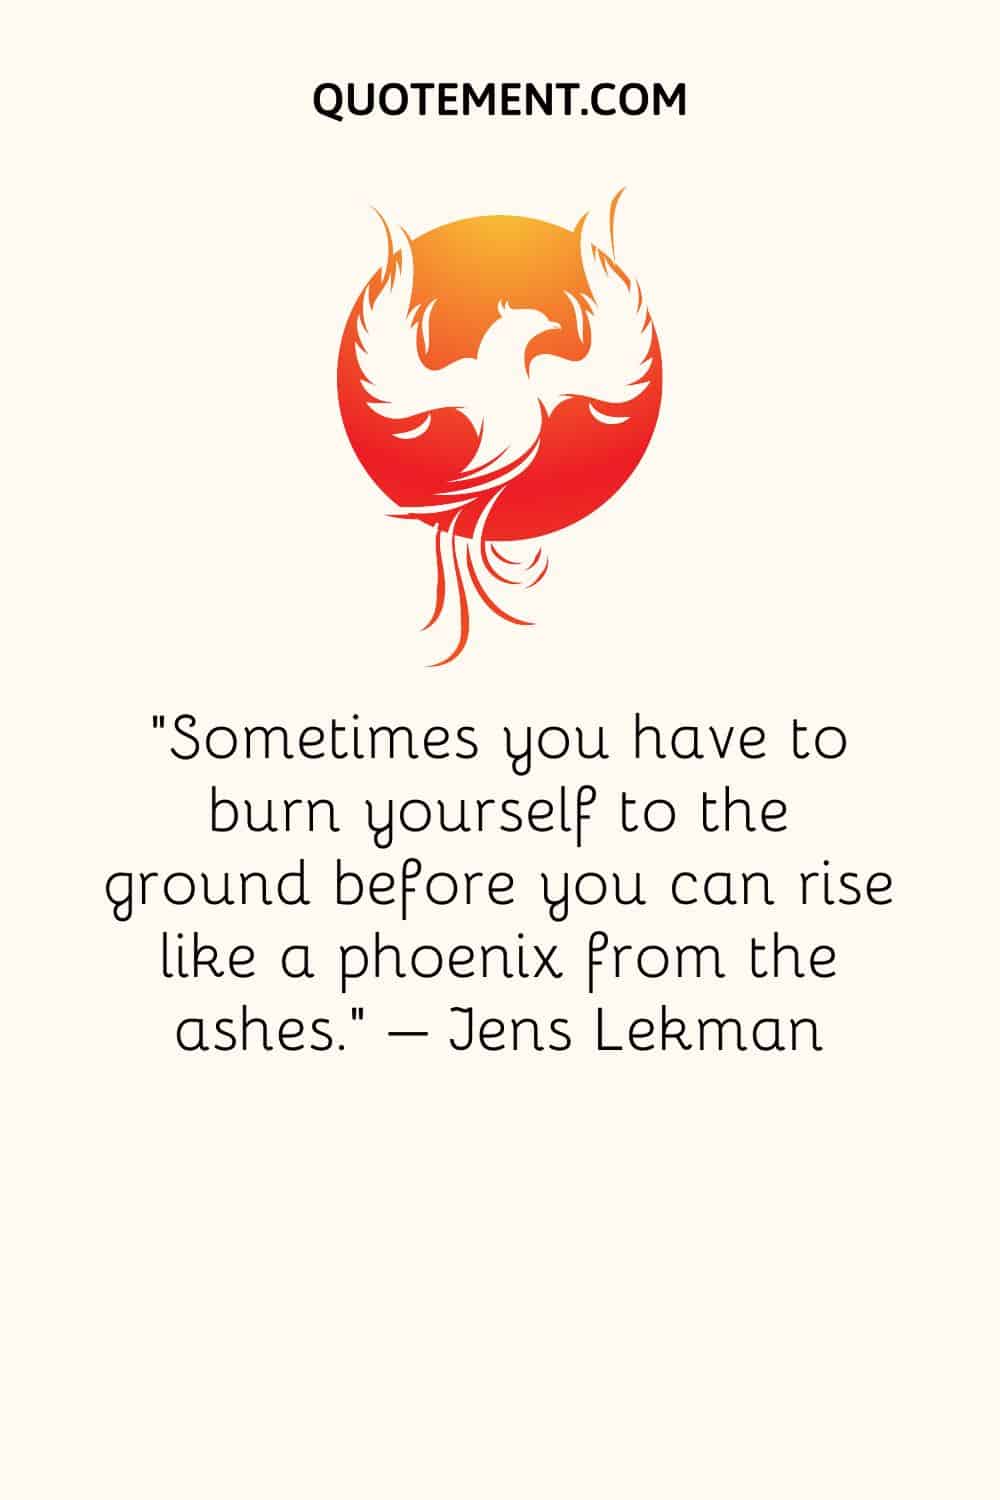 Sometimes you have to burn yourself to the ground before you can rise like a phoenix from the ashes